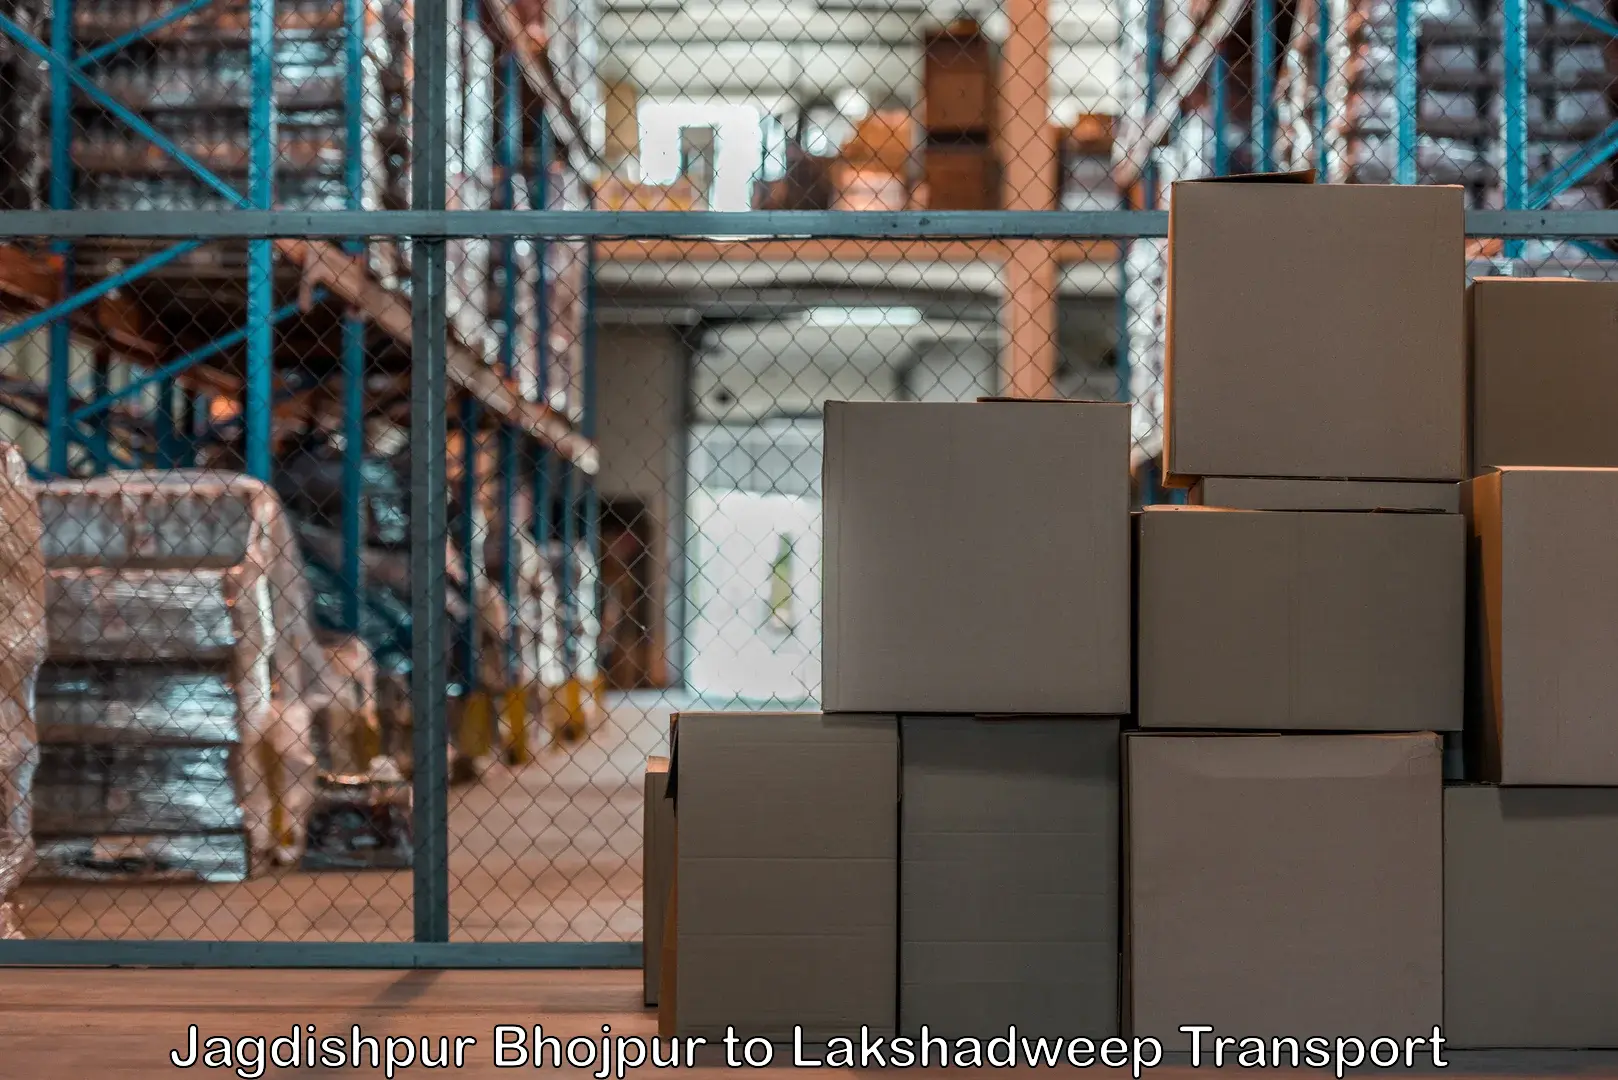 Part load transport service in India in Jagdishpur Bhojpur to Lakshadweep